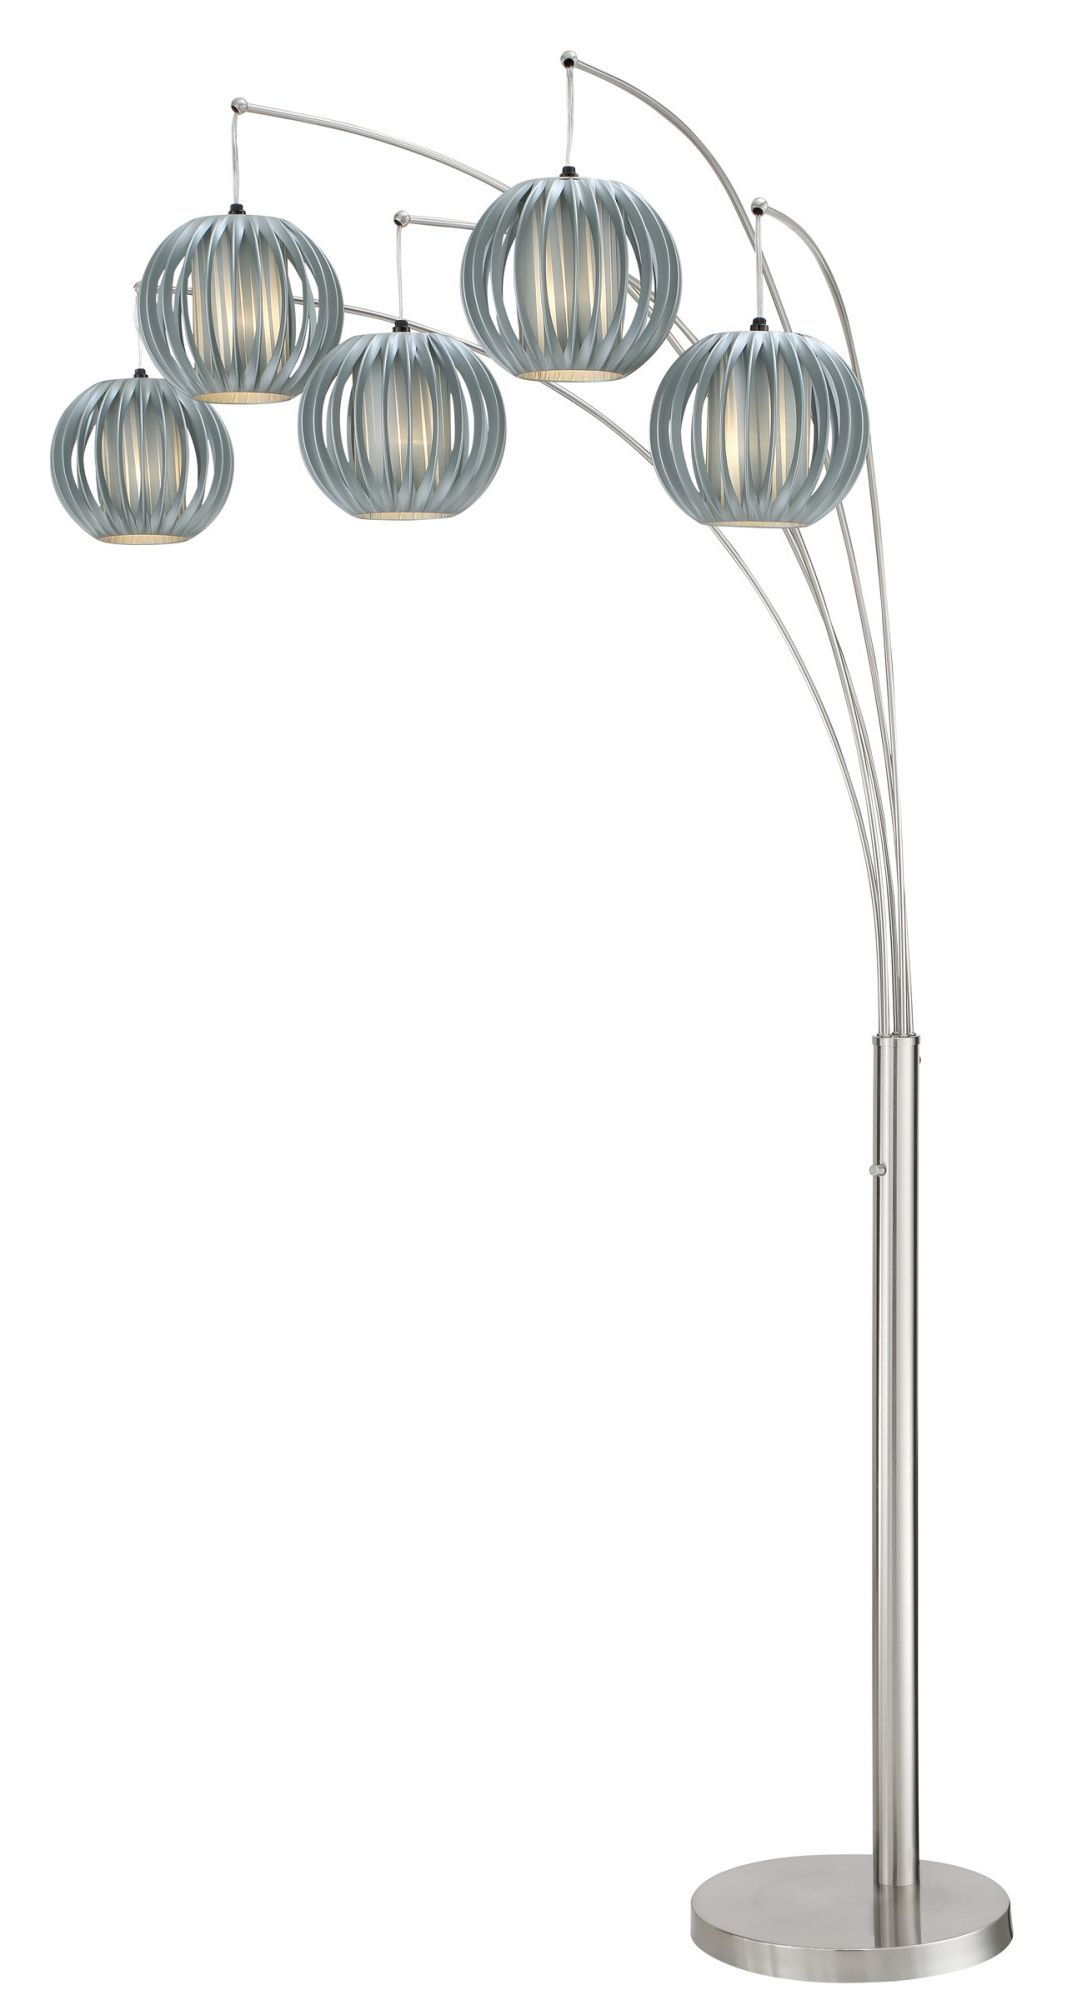 Lite Source Ls 8872 Deion 5 Light 90" Tall Arc And Tree Floor Lamp – Grey –  Walmart For Most Current 5 Light Arc Floor Lamps (View 13 of 15)